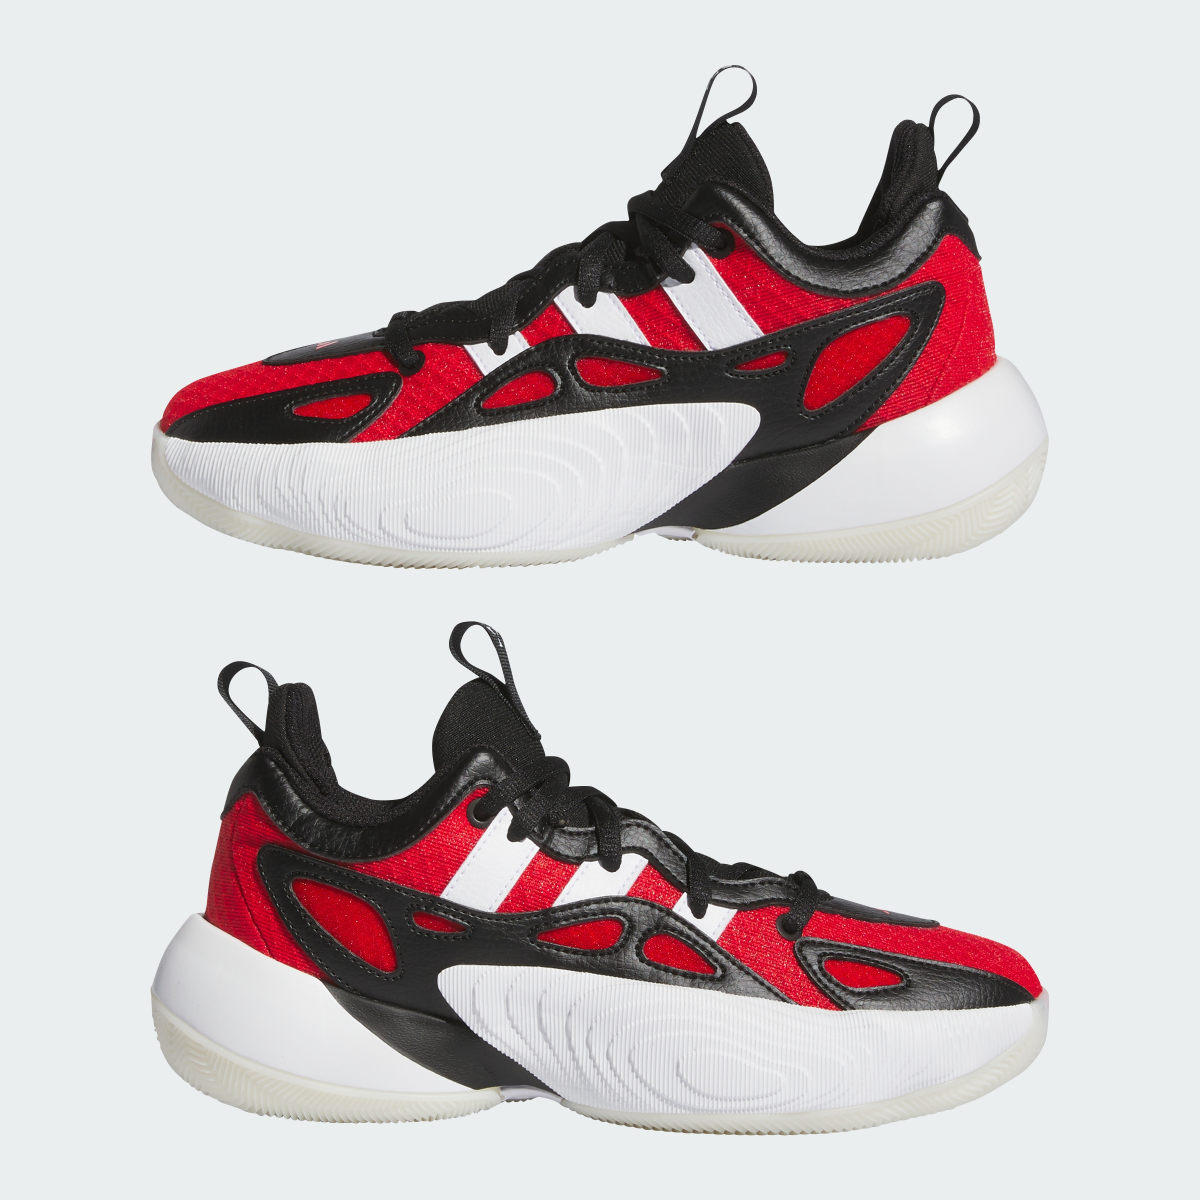 Adidas Chaussures Trae Young Unlimited 2 Low Enfants. 8